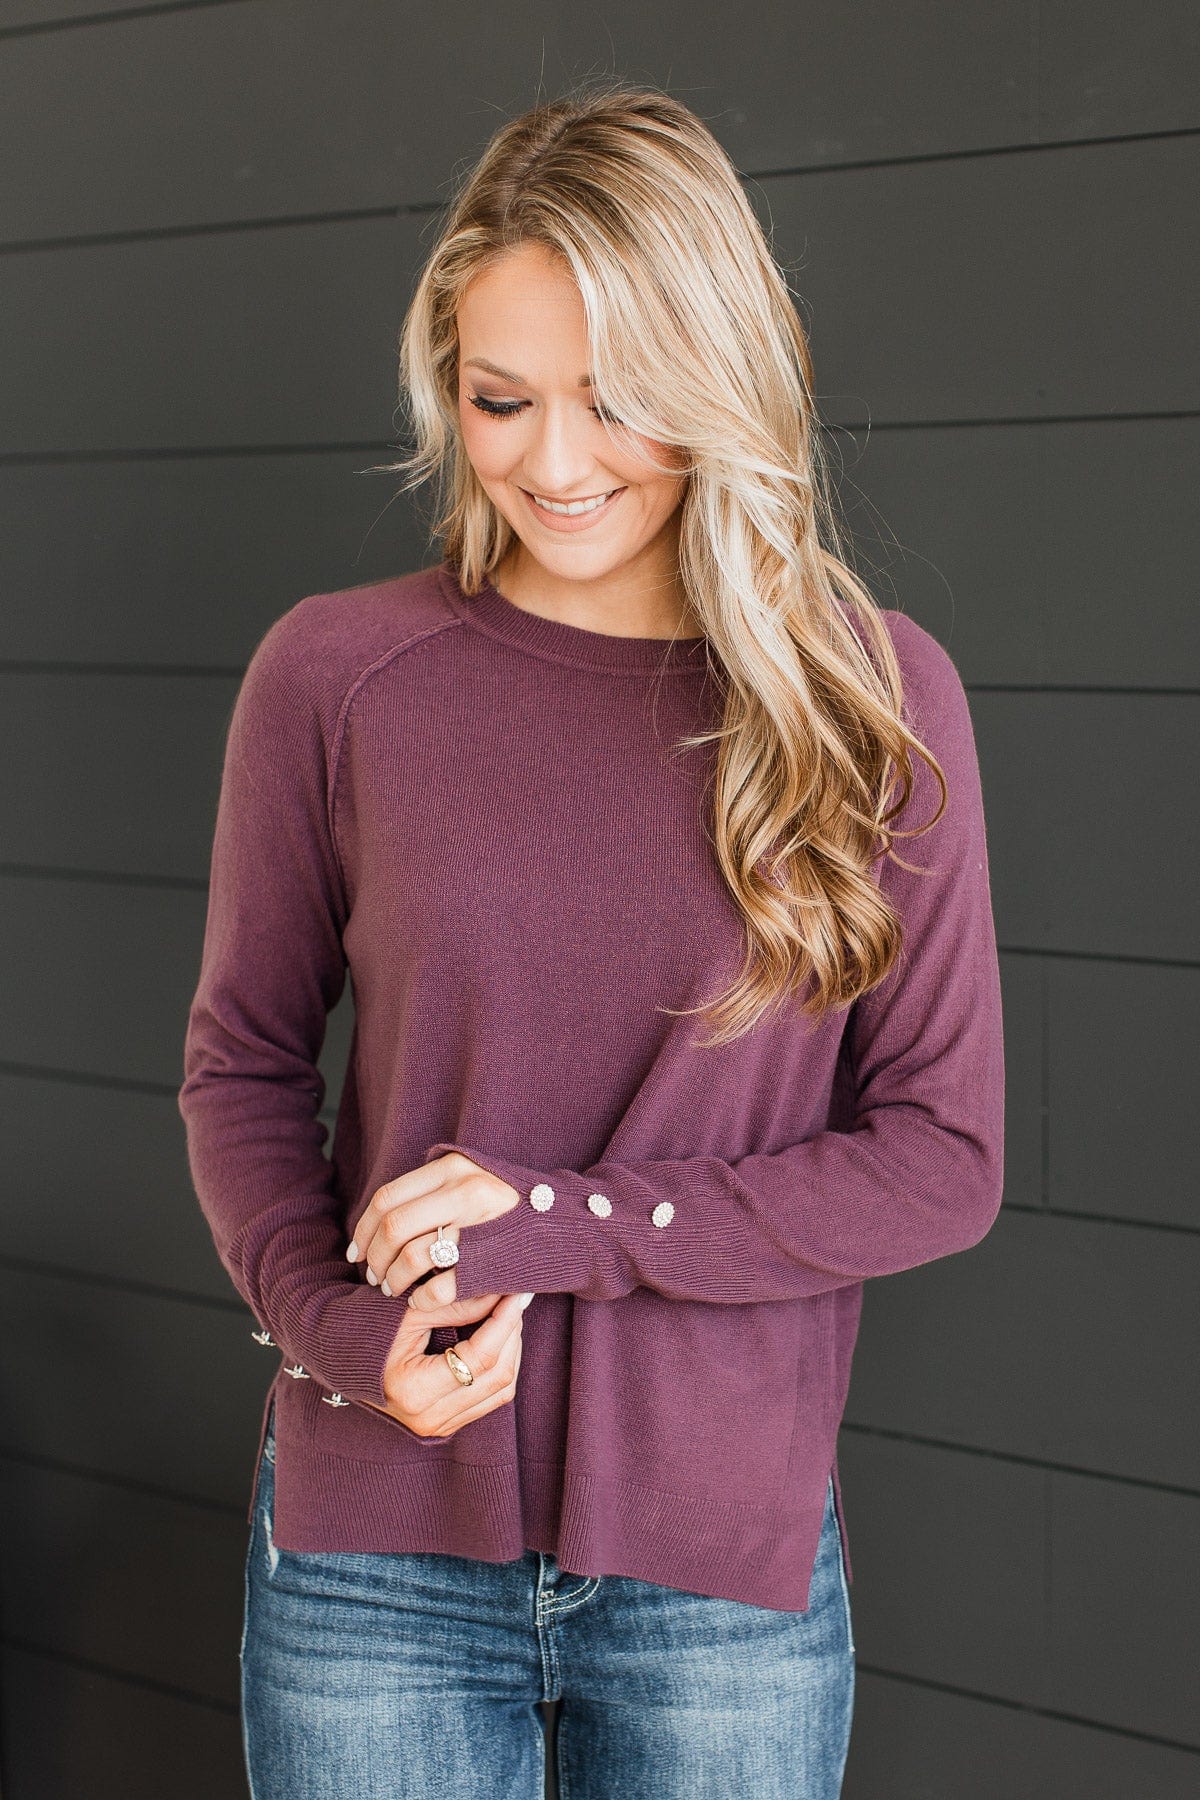 Happiest Moment Knit Sweater- Plum